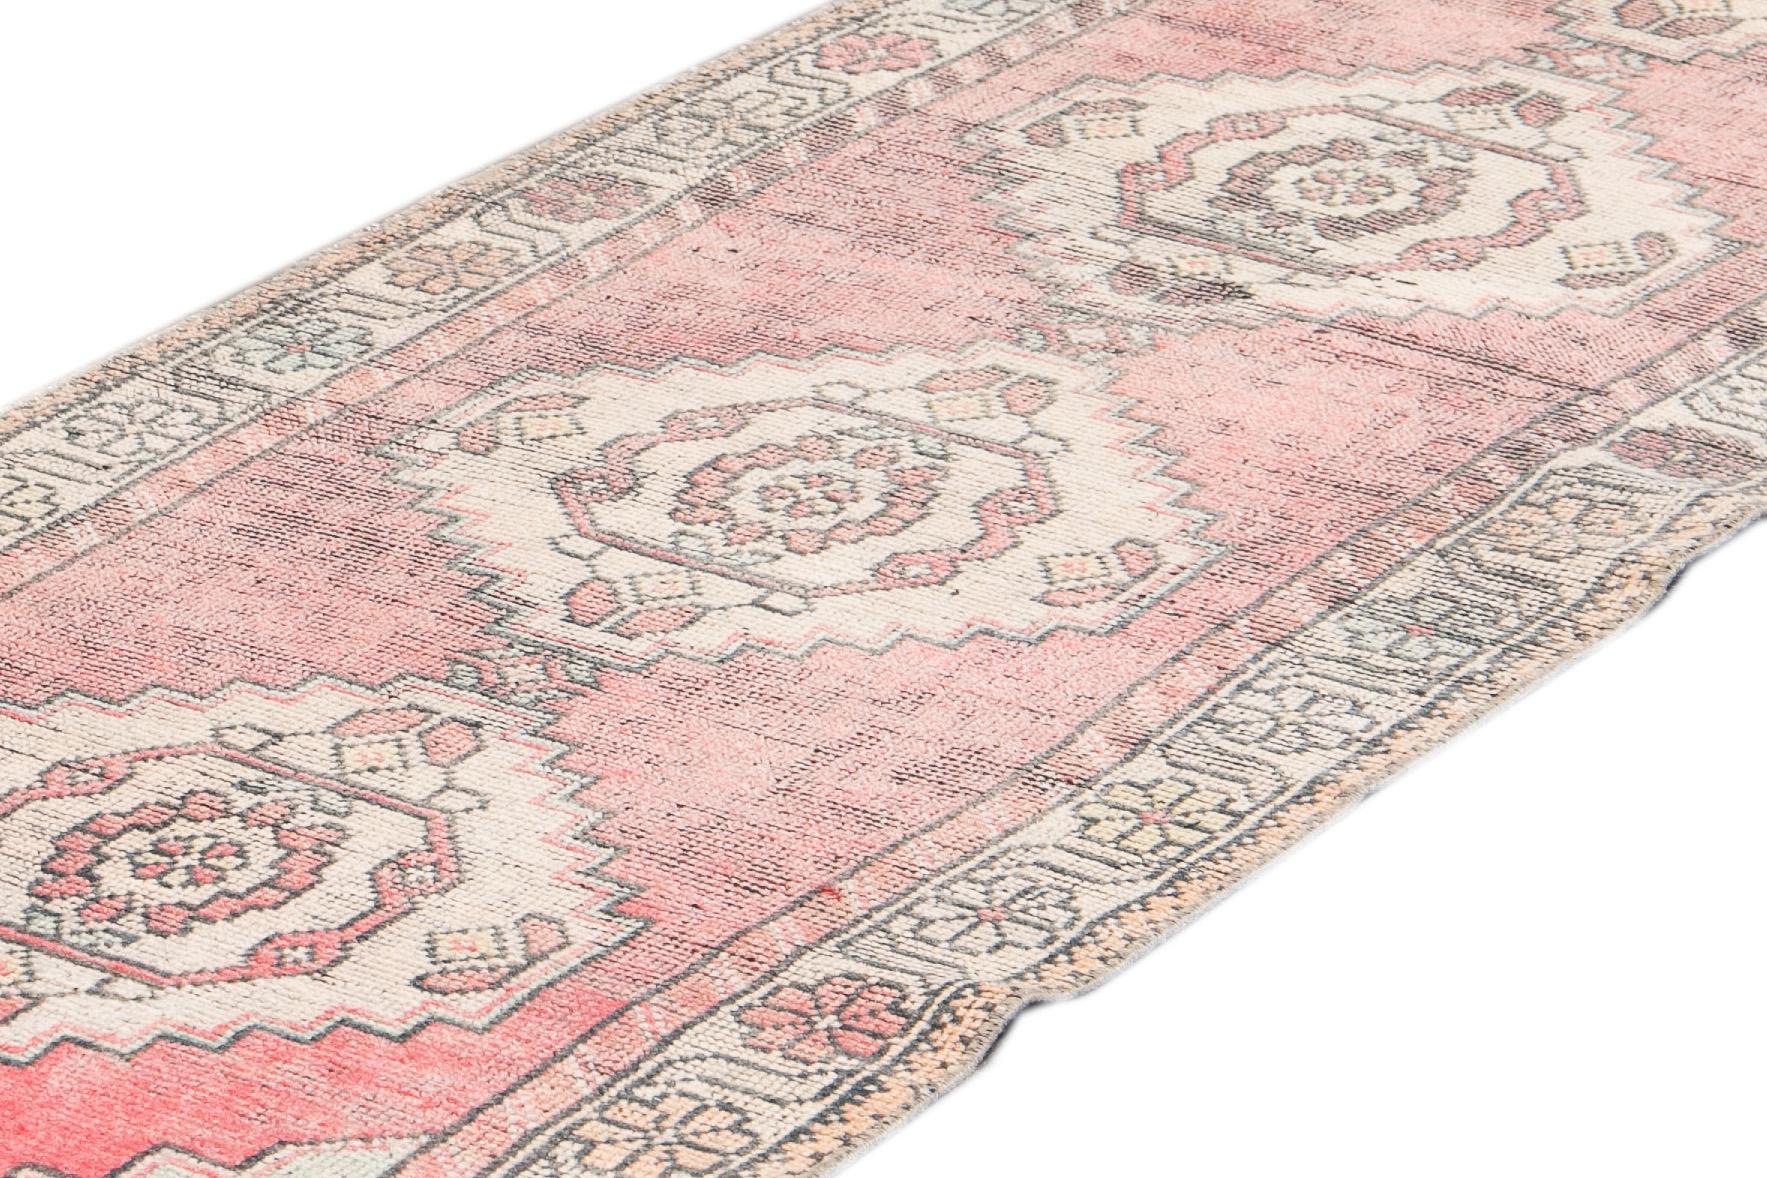 Beautiful Antique Runner rug, hand knotted wool with a light pink field, ivory and gray accents in an all-over multi medallion geometric design.

This rug measures 2' 10